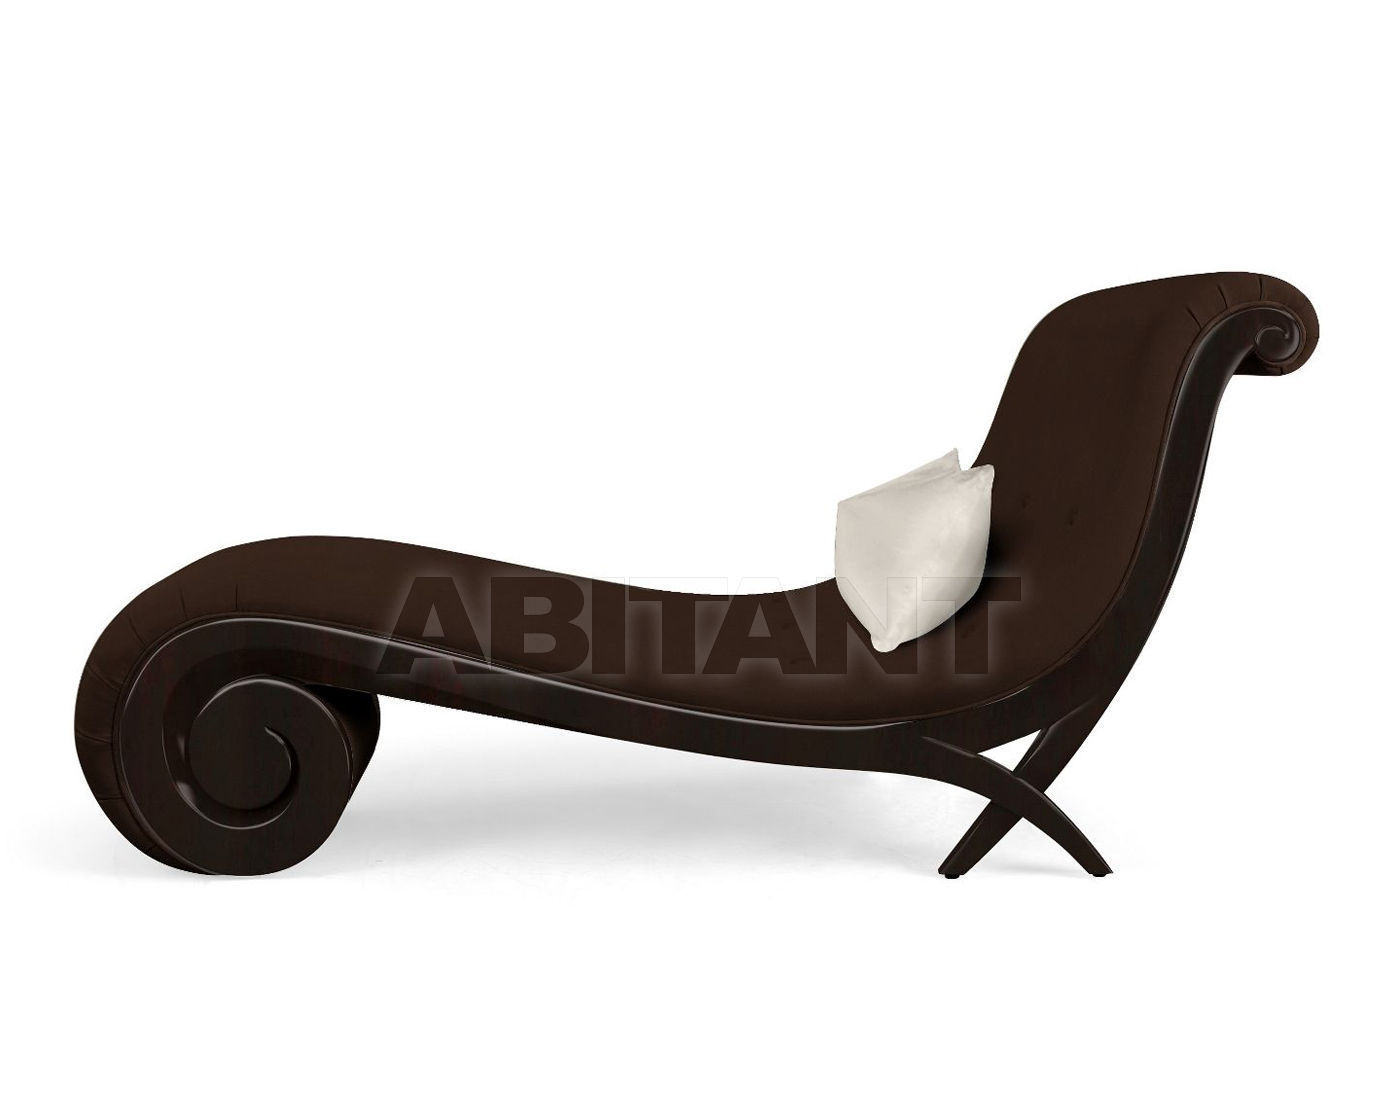 Buy Couch Le Meurice Christopher Guy 2014 60-0107-CC Mahogany